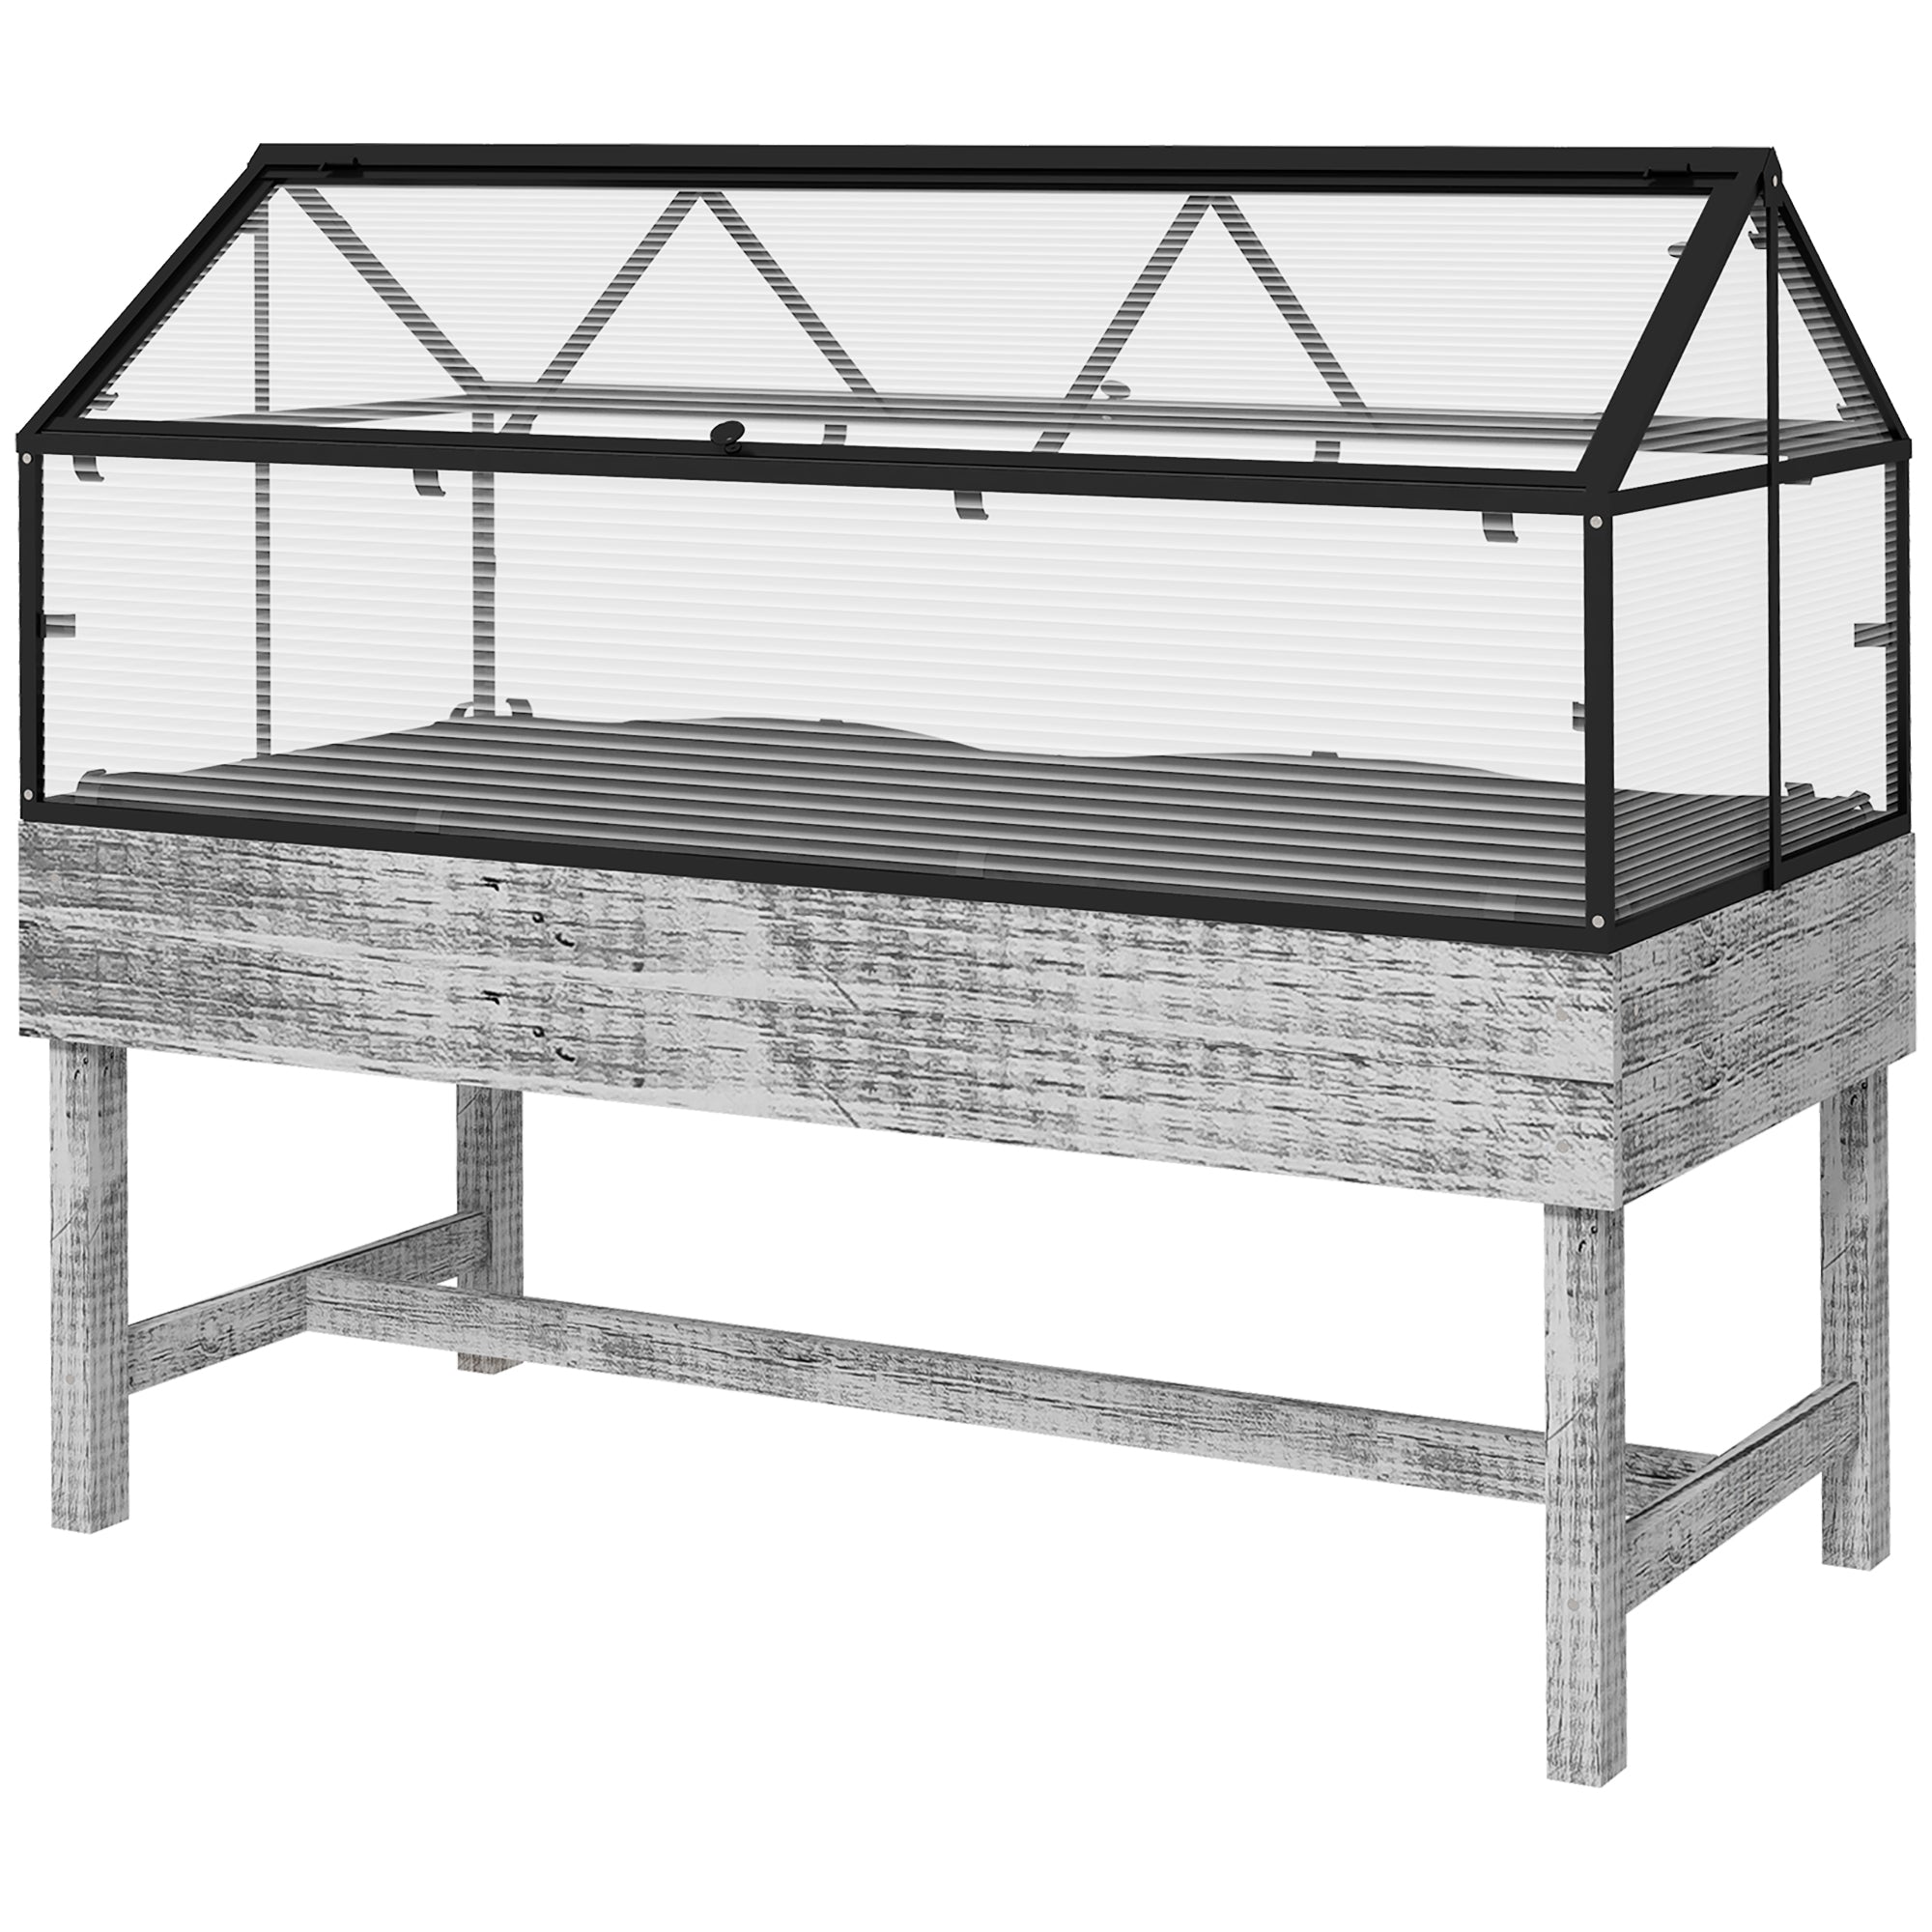 Outsunny Elevated Wood Planter with Mini Greenhouse Raised Garden Bed with PC Panel Top Vent 120 x 60 x 103cm Distressed Grey